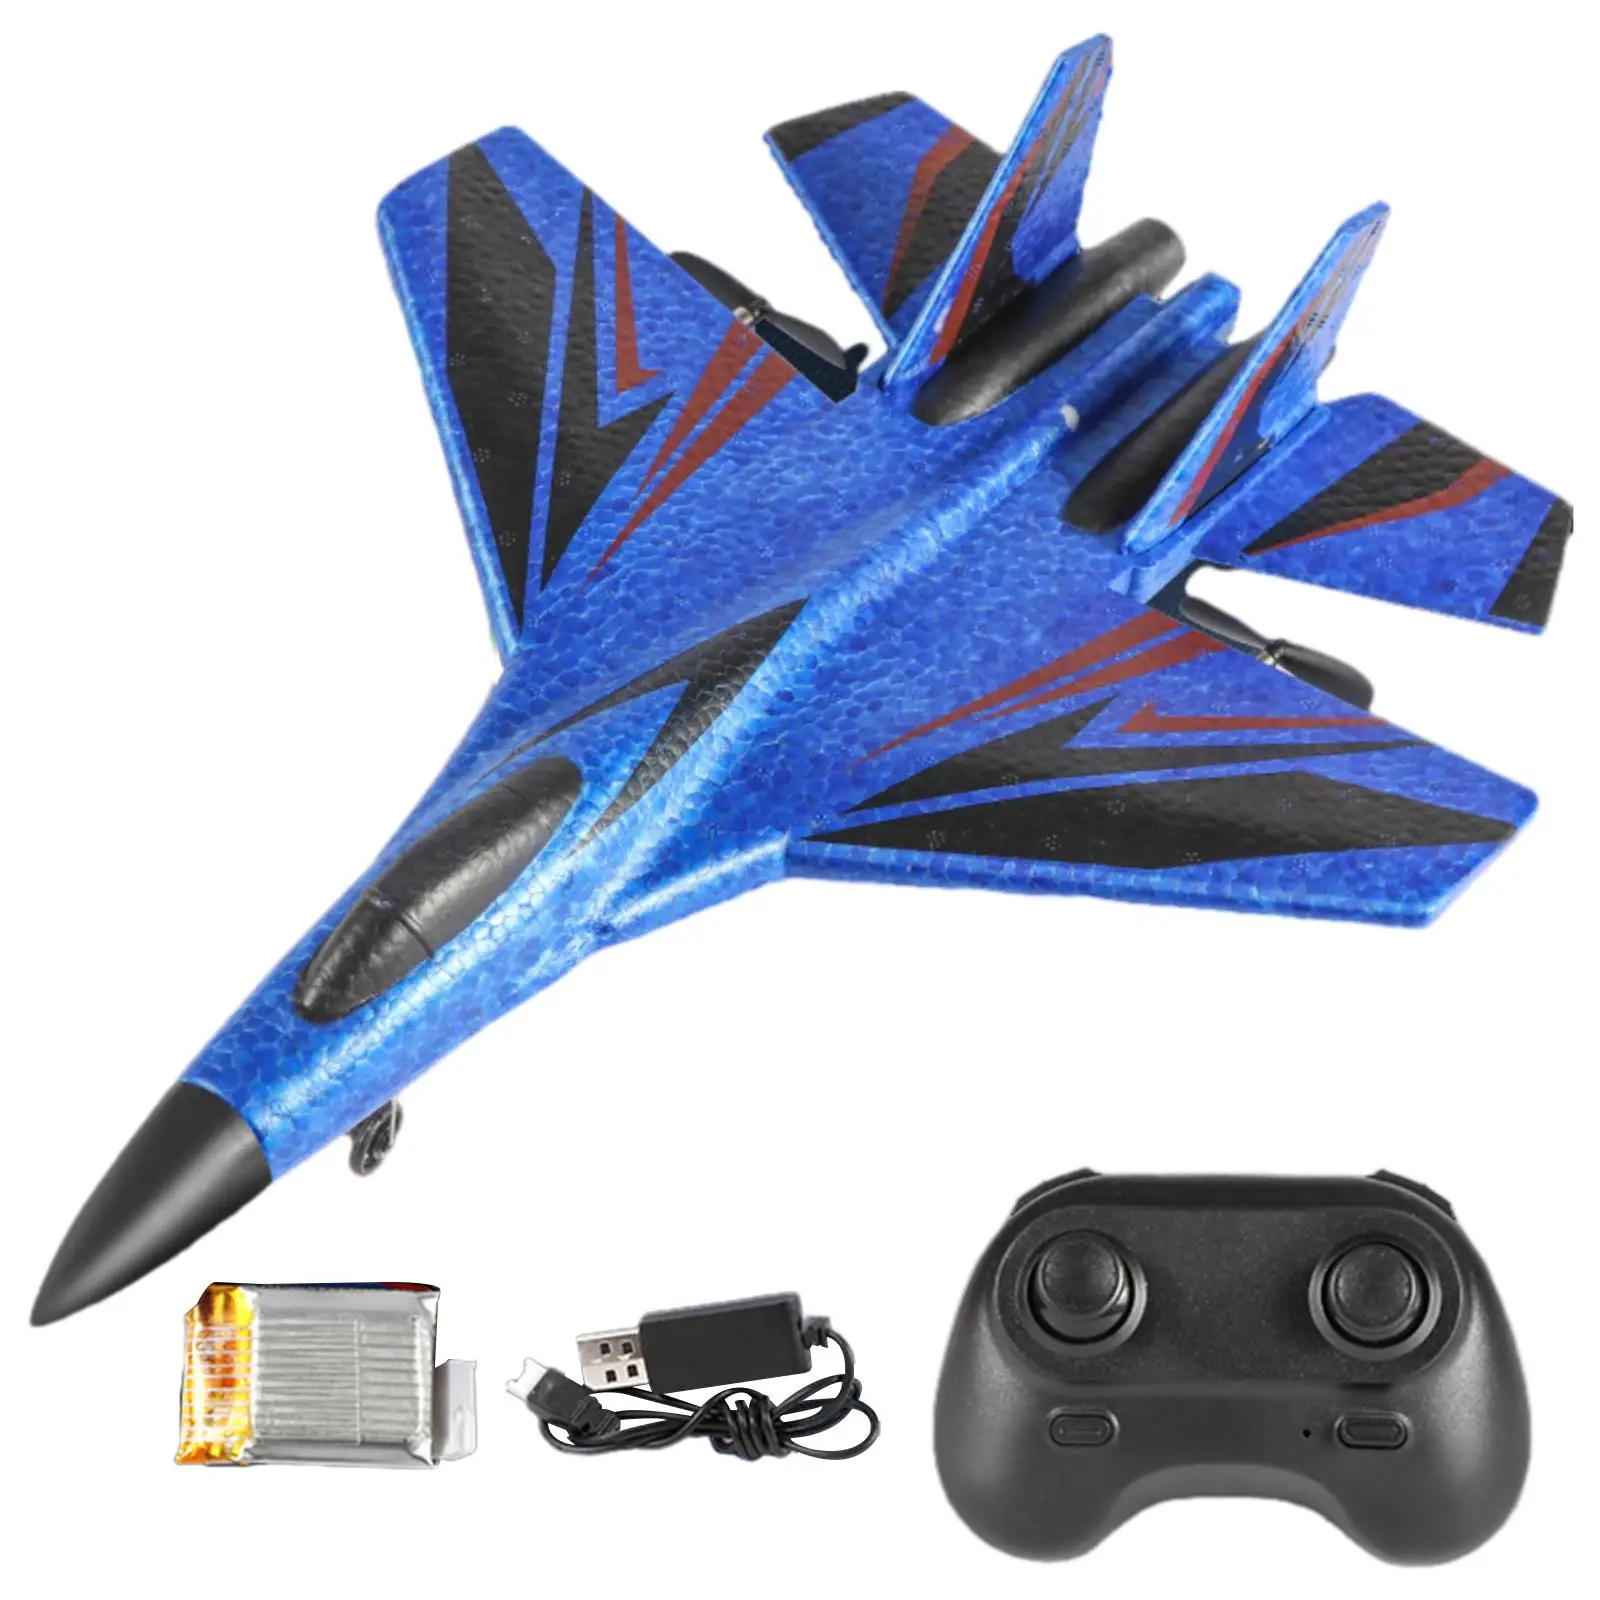 Foam RC Glider SU30 Aircraft Model Toys Glider Fighter Toys Remote Control Aircraft for Children Kids Boys Girls Birthday Gifts